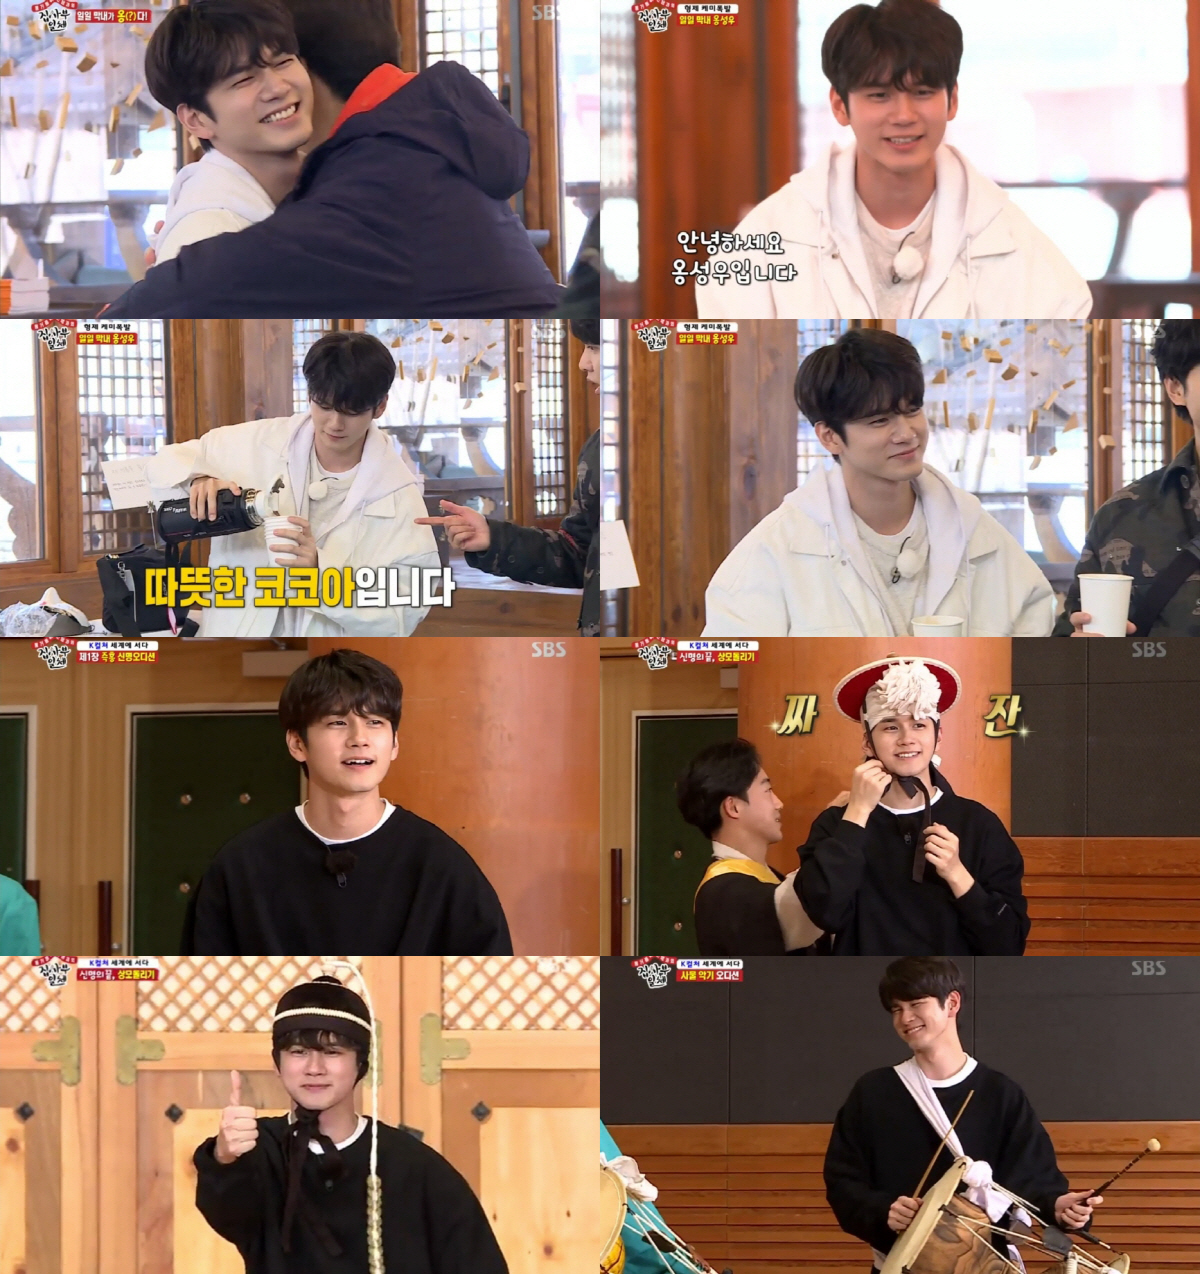 Ong Seong-wu played a big role as a Ace daily student who could not do anything.On the 22nd SBS All The Butlers, the actor of the actor, Ong Seong-wu, was drawn to Master Kim Duk-soo,On this day, Ong Seong-wu appeared as the youngest daily with the introduction of Lee Seung-gi, I am a personal favorite and curious friend, a trusted and all-rounder.To solve the awkwardness of his first appearance, he came to the members first by demonstrating the sense of preparing a warm cocoa, recalling Lee Seung-gi at the All The Butlers Challenge a year ago.Ong Seong-wu, who also showed a witty gesture with excellent artistic sense, added, Please be comfortable and brightened the atmosphere of the scene.In the concert hall where I went to meet the master with the guidance of Ong Seong-wu, Samulnori Legend Kim Duk-soo appeared with exciting Korean music.The four disciples who watched Samulnori full of dynamic energy could not hide their surprise, and Ong Seong-wu said, I cry my heart.According to Kim Duk-soos words that Samulnori should wake up the Nomen novum inherent before Actor, the disciples showed free dance to our rhythm.Kim Duk-soo, who remembered the story of Ong Seong-wu, I like static, gave him a good street rhythm, and Ong Seong-wu made a smile of the master with a dance with exotic Nomen novum such as B-Boing in Korean rhythm.Kim Duk-soo, who was impressed by the disciples Nomen novum, announced his acceptance and the members became Actor of Sangmonori called the end of Nomen novum.The Ace aspect of Ong Seong-wu was revealed in the process of Actors play of Sangmo.Ong Seong-wu, who was taught by the master that the mother should return using the reaction of the mother, not the movement of the neck, realized the feeling of turning the mother immediately after Yang Se-chan and emerged as Sangmo Ace.Ong Seong-wu, who made a perfect jump with a 12-shot hair that requires high concentration, showed Lee Seung-gi to the side of the air and laughed at the audience by receiving a fixed member proposal saying, Is it okay for the week?Ong Seong-wu, who became an actor in the instrument of Samulnori in earnest, showed his desire to take charge of the janggu.Ong Seong-wu, who absorbed all of his unstoppable masters teachings with excellent concentration, became a ongjanggu with the sound of a long-spoken janggu.It focused attention on those who see it as a good all-rounder.Ong Seong-wu, who showed his natural sense of entertainment and wit throughout the broadcast, naturally permeated the program as a daily student and attracted the hearts of viewers with his the youngest who is good at everything and was ranked in the top of the real-time search query.On the other hand, All The Butlers show off his passionate performance, All the All, Ong Seong-wu is about to release his first mini album LAYERS (Layers) at 6 pm on the 25th.